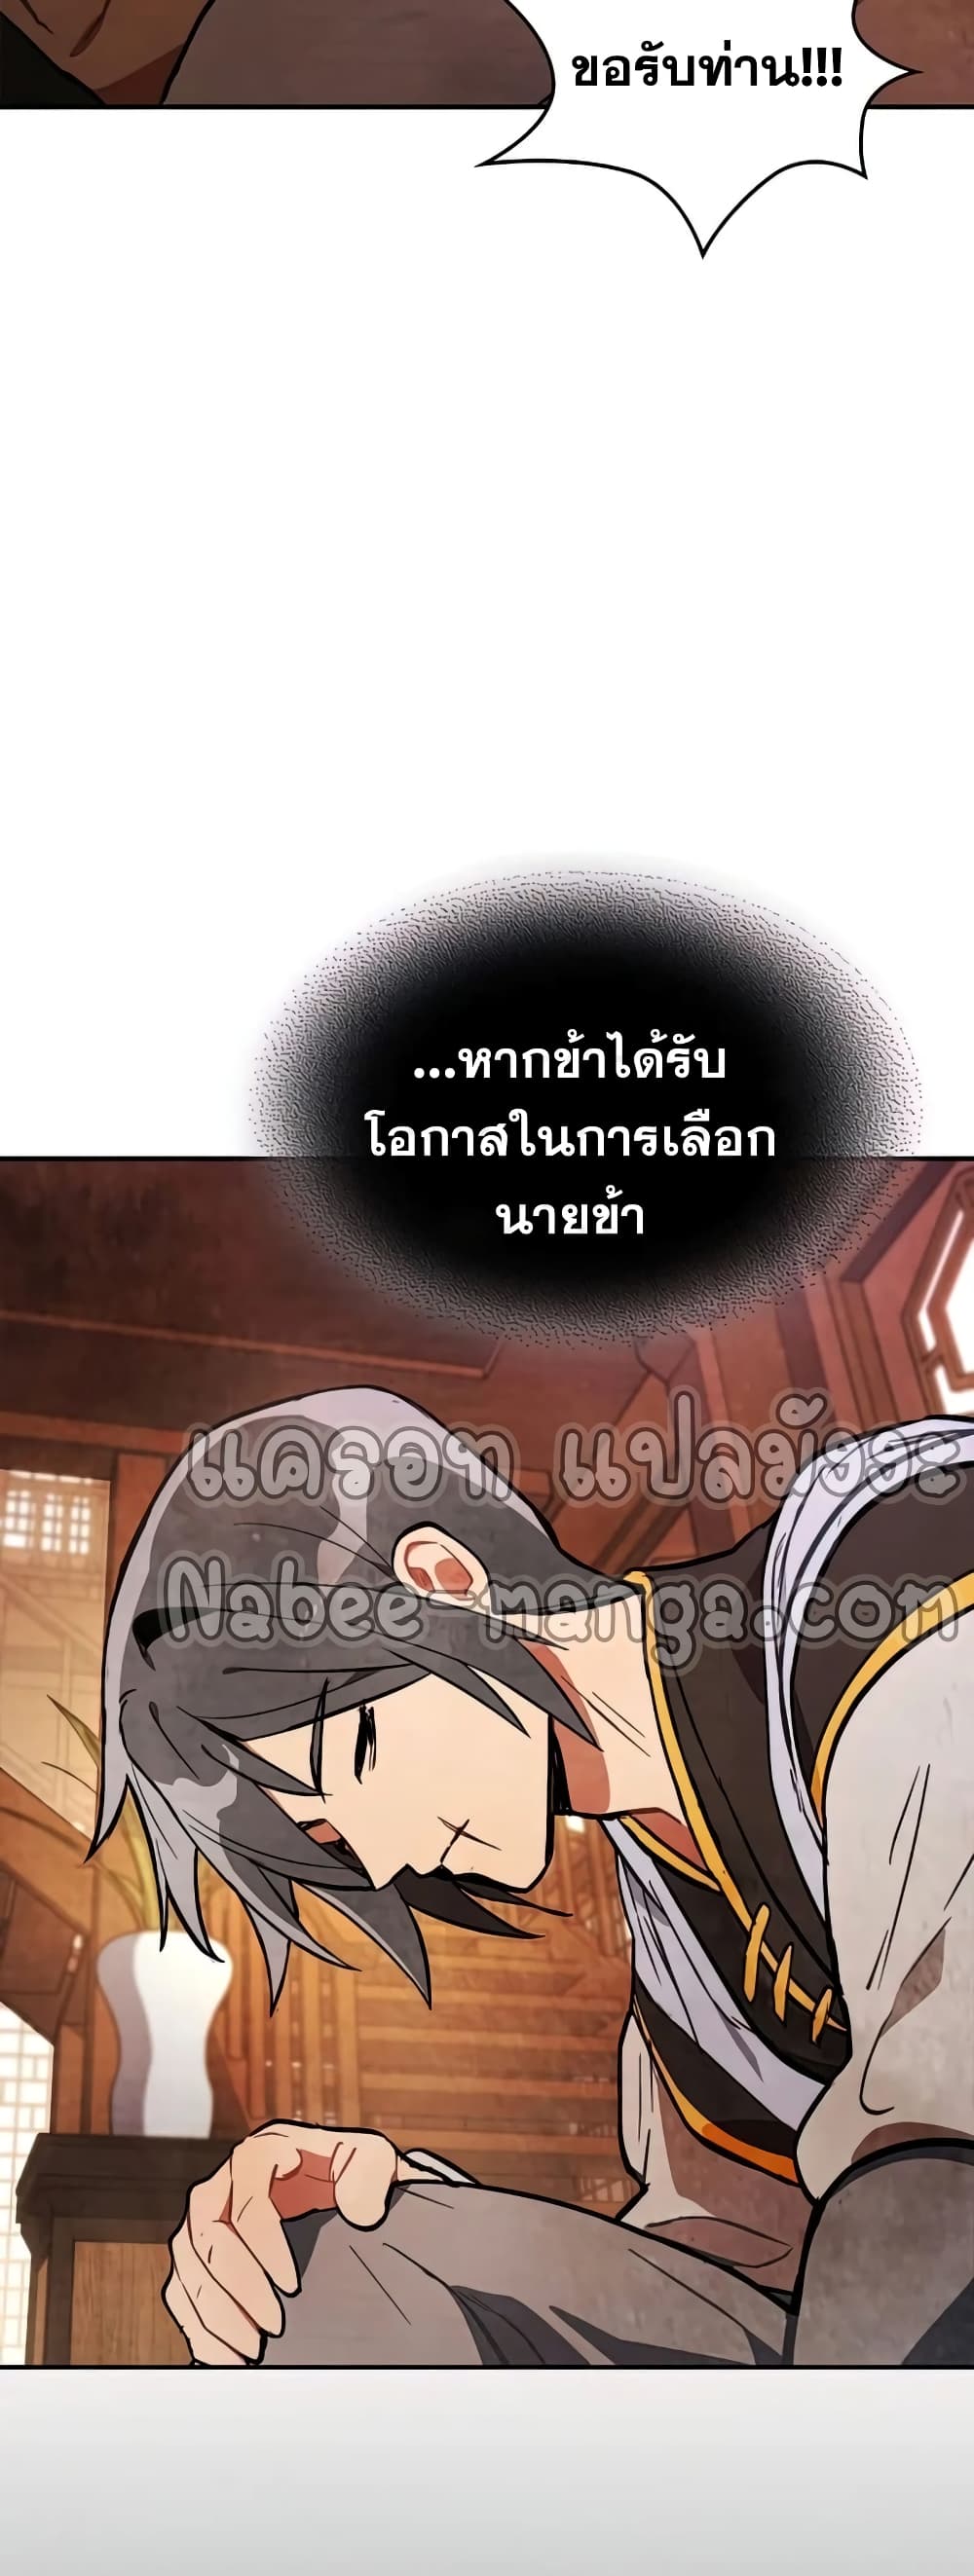 Chronicles Of The Martial God’s Return ตอนที่ 22 (59)